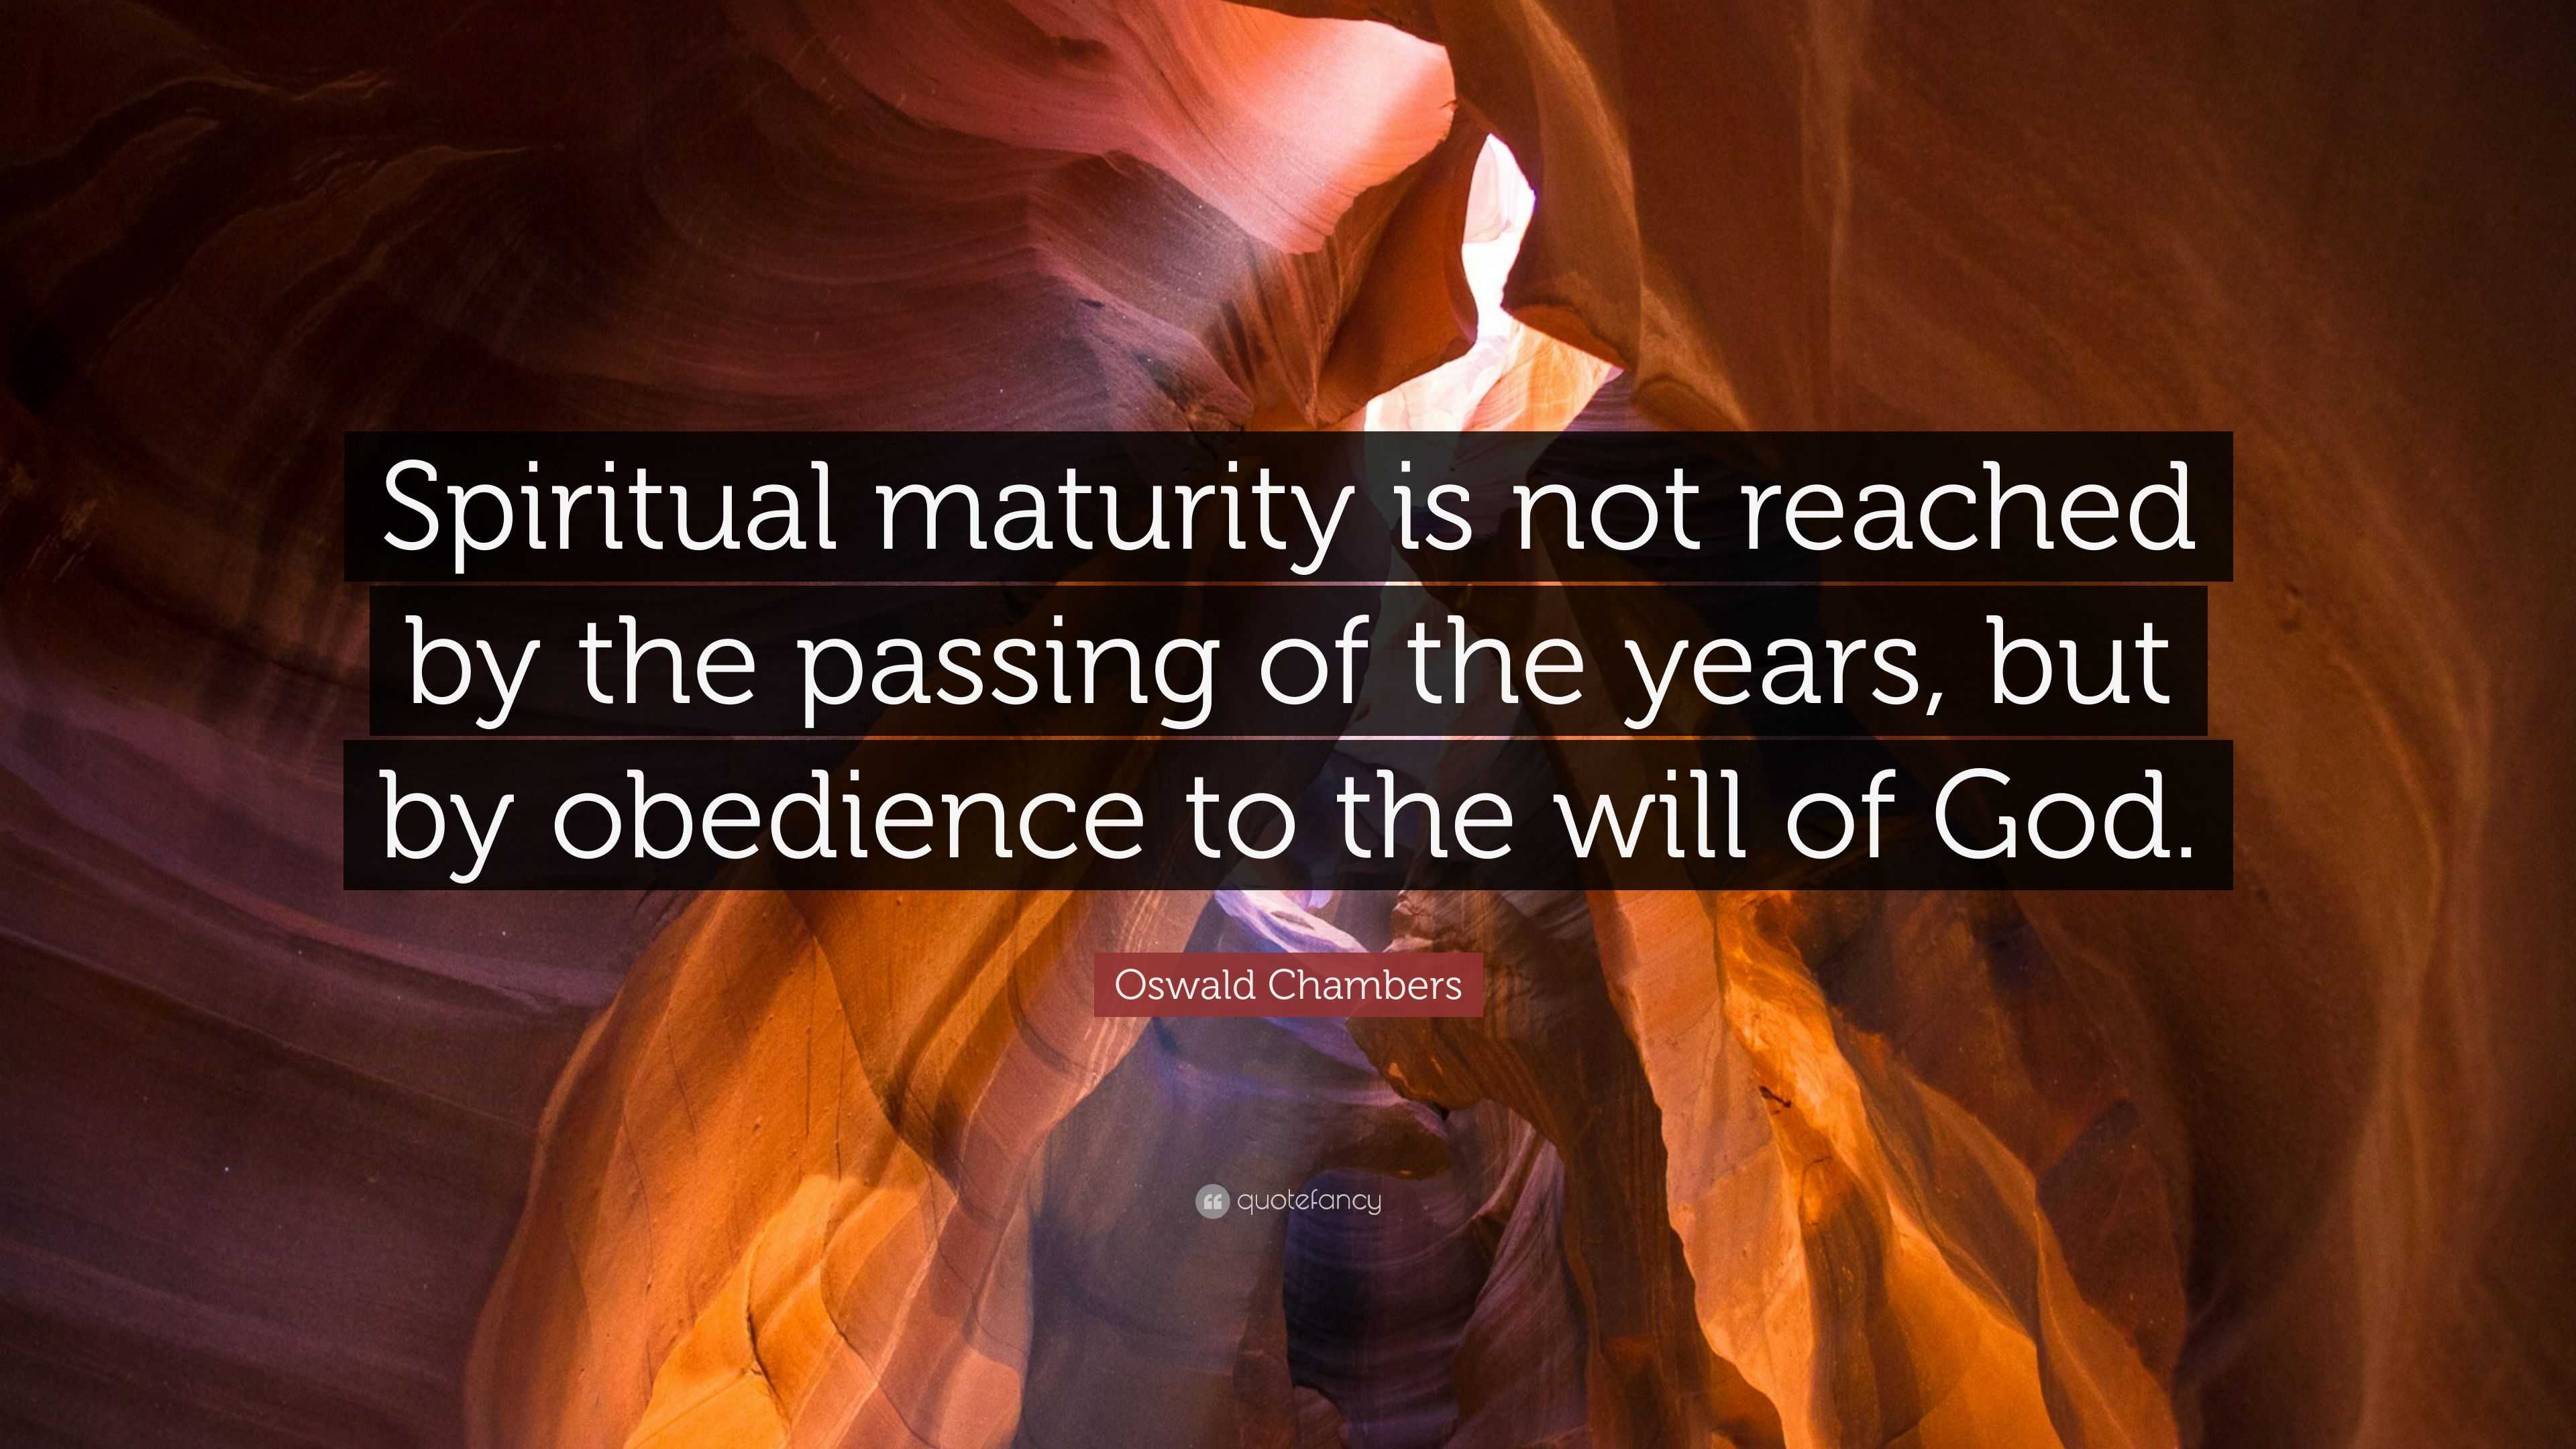 Oswald Chambers Quote: “Spiritual maturity is not reached by the